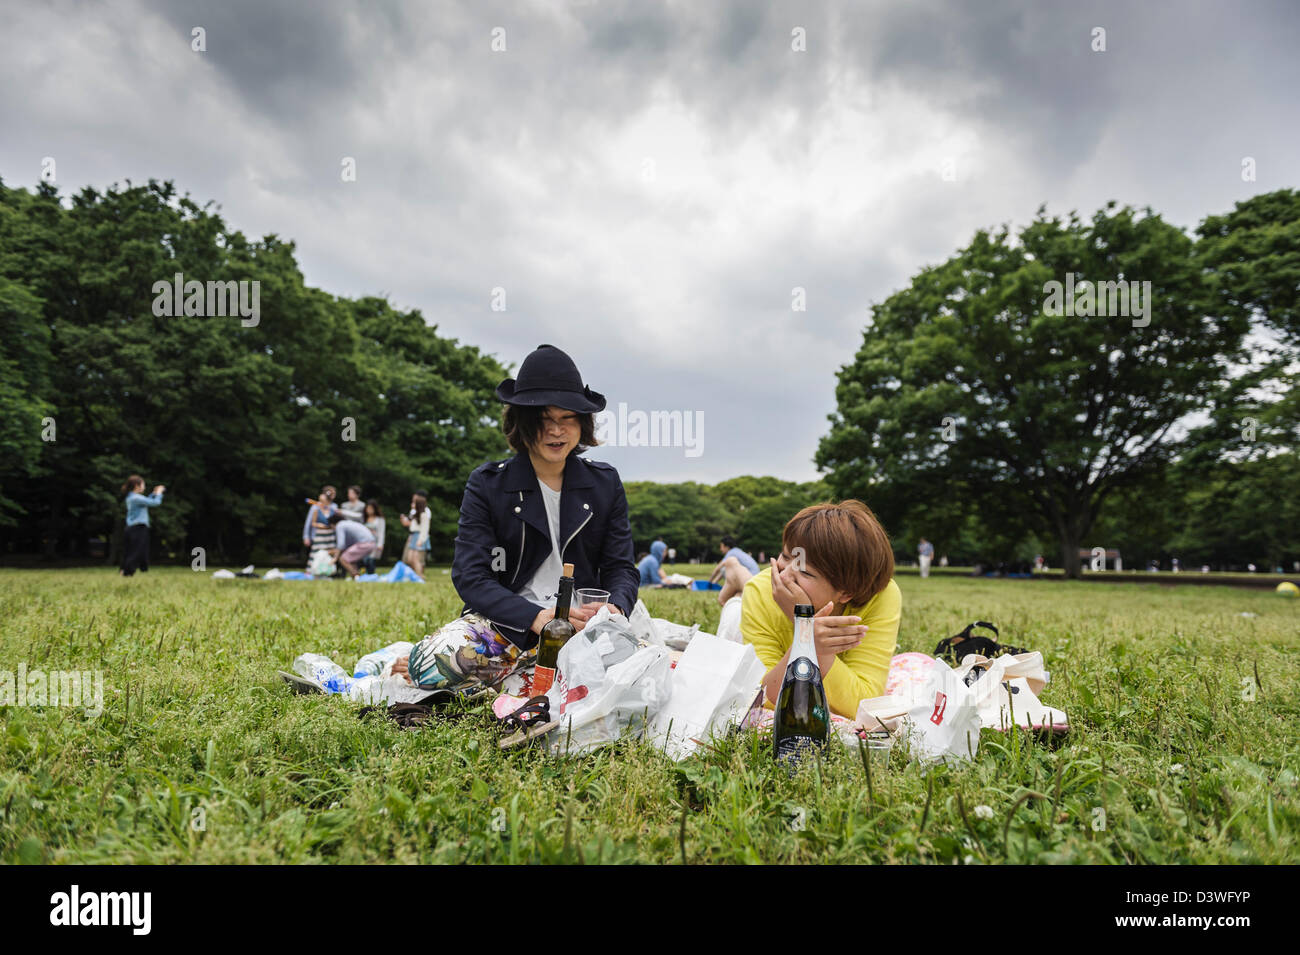 Couple enjoying the weekend at Yoyogi park on a cloudy day, Tokyo, Japan, Asia Stock Photo